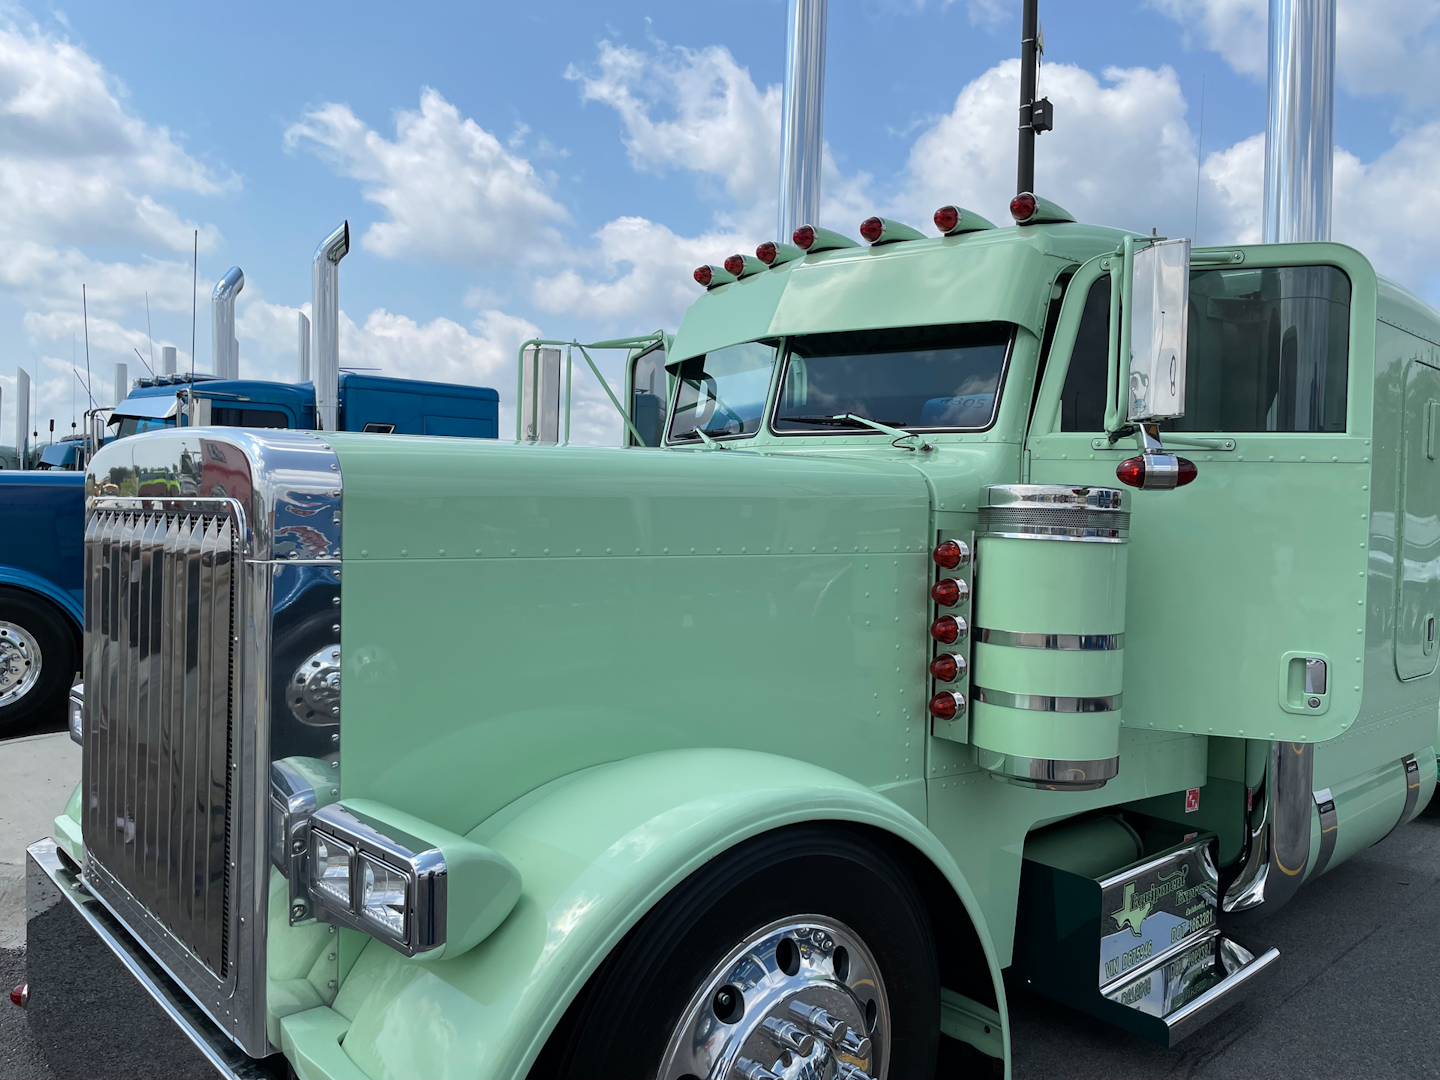 Randy Supak also hauls oversize/overweight freight for Equipment Express with this mint green 2007 Peterbilt 379.